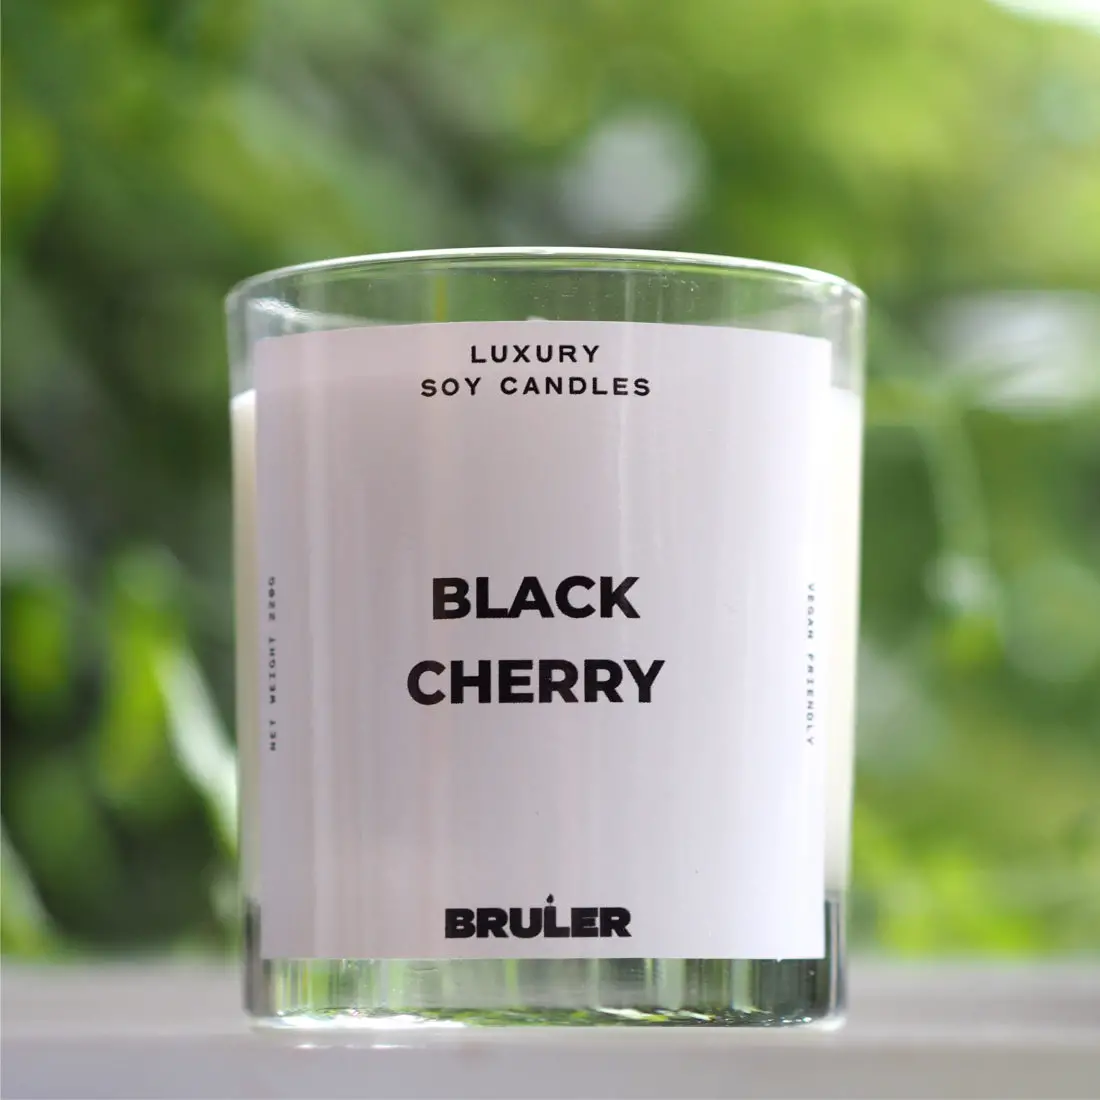 Bruler Black Cherry Candle Review